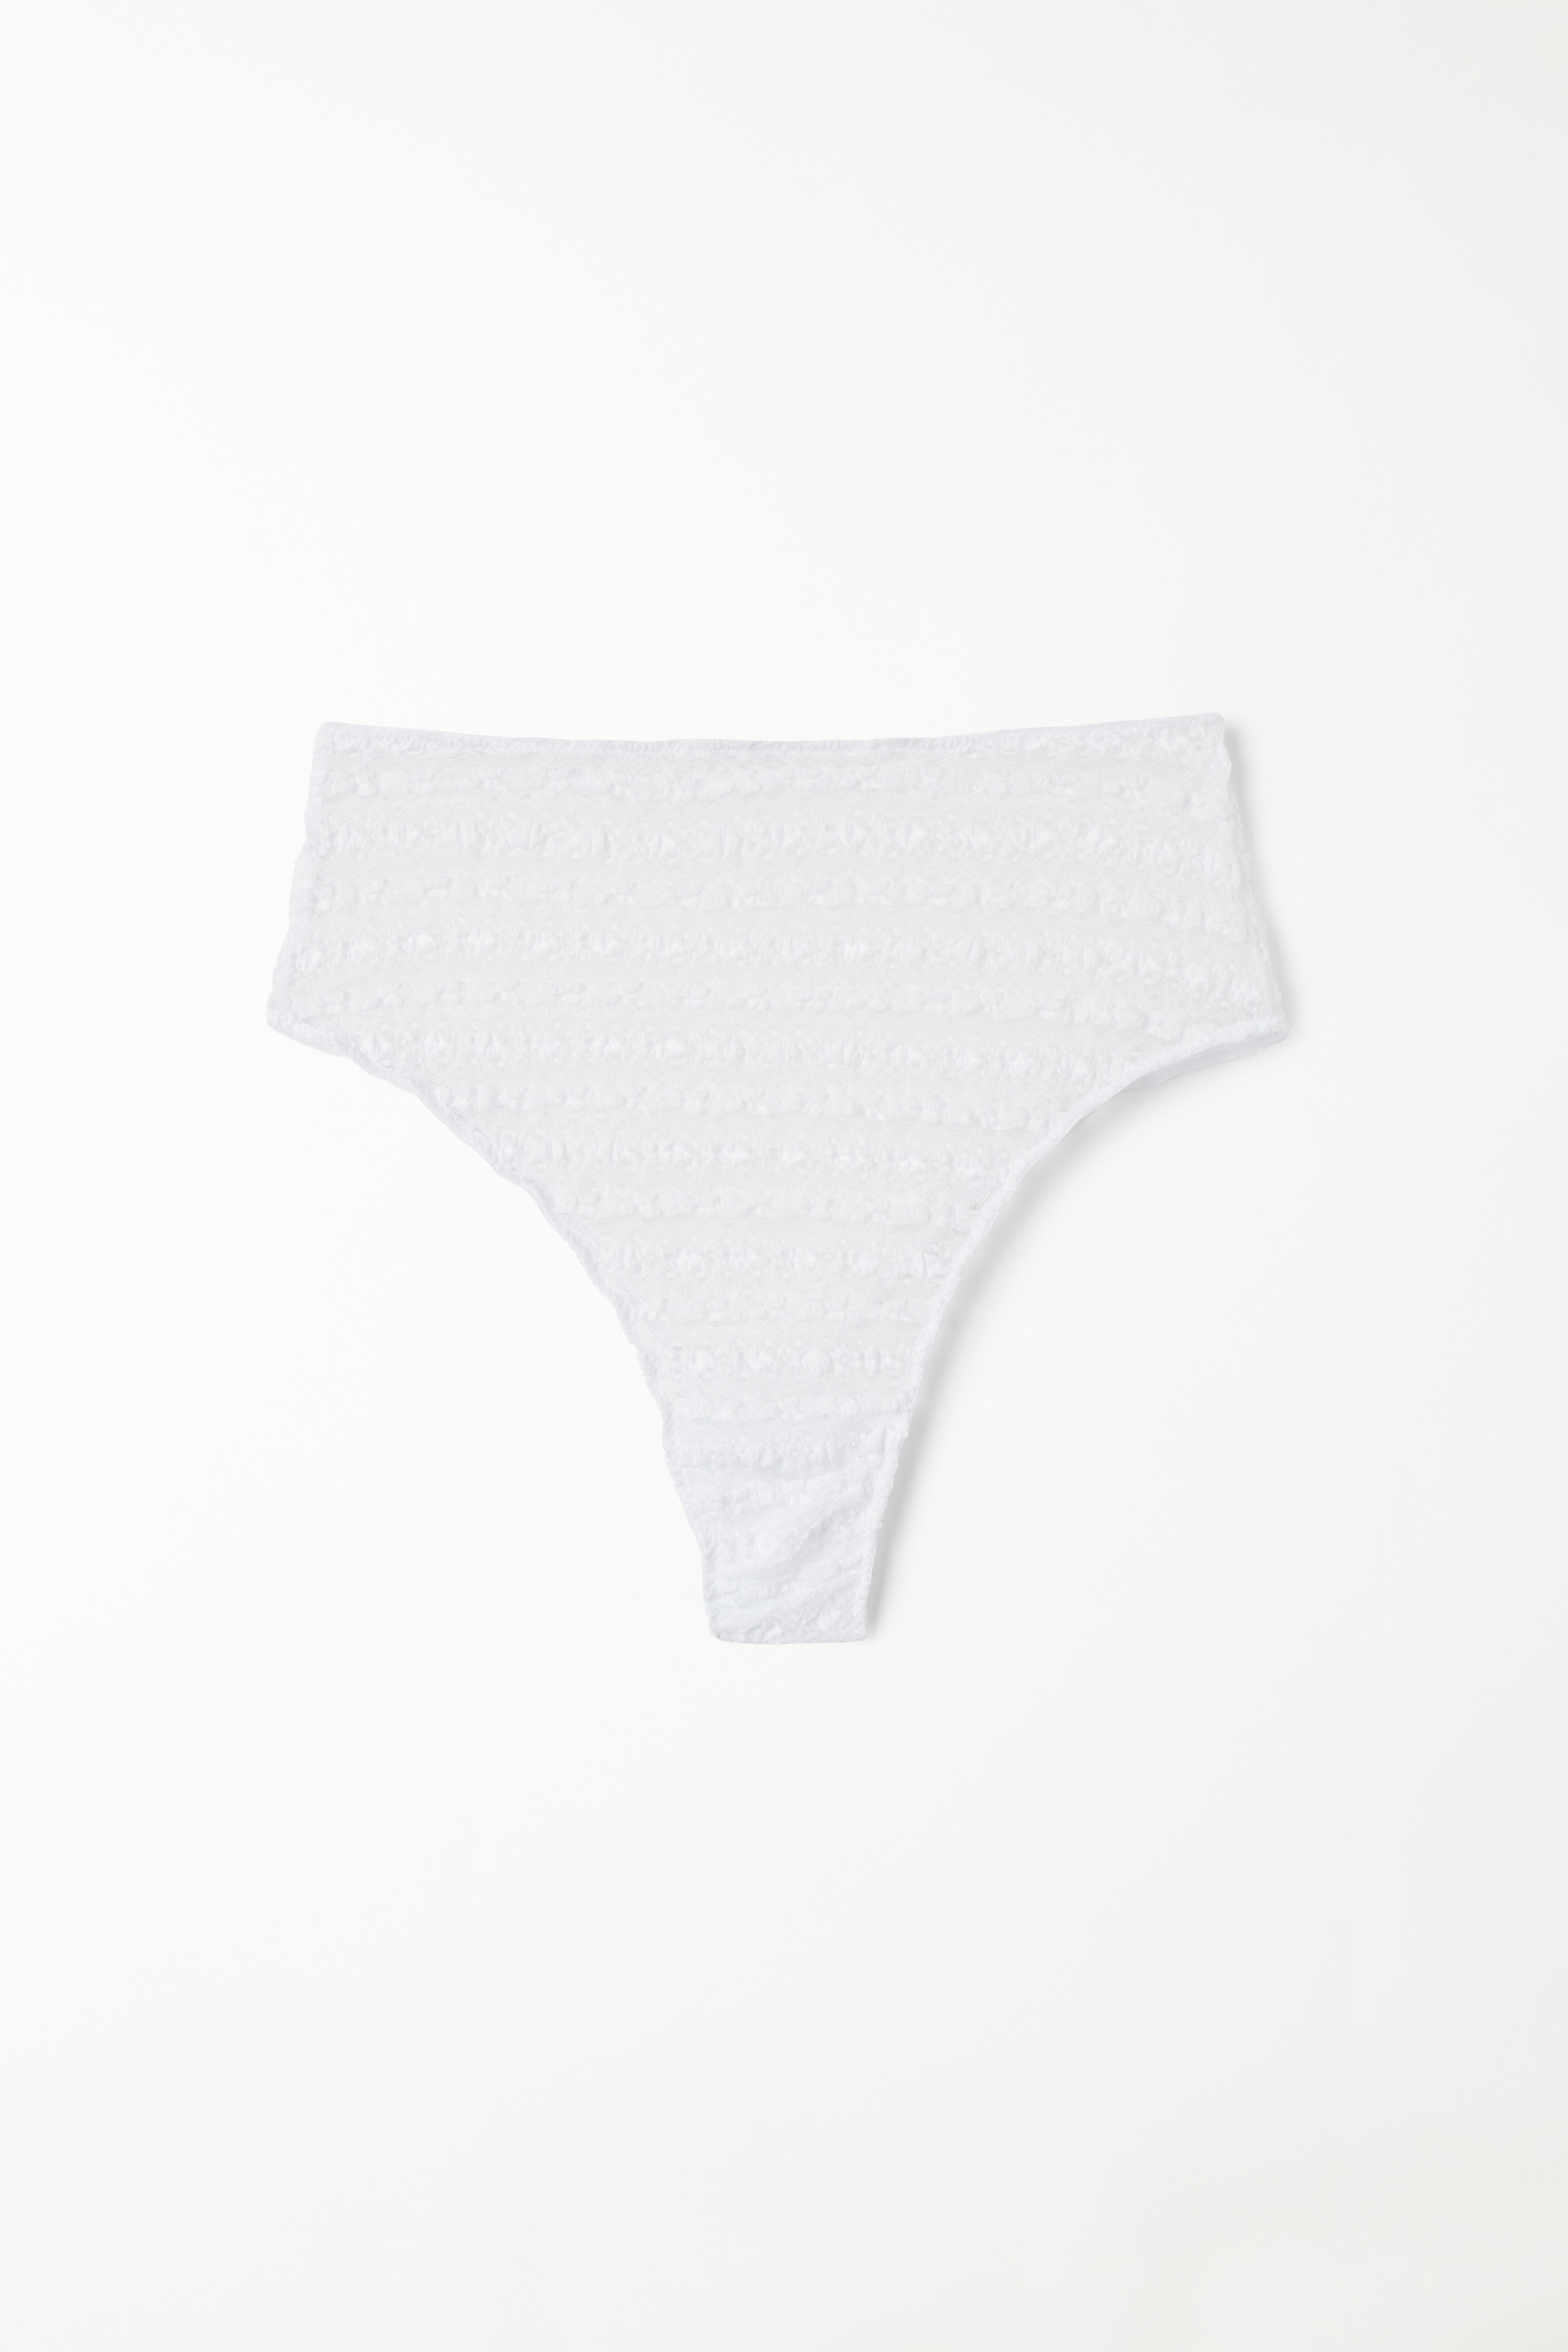 Country Bride High-Waist Brazilian-Cut French Knickers.